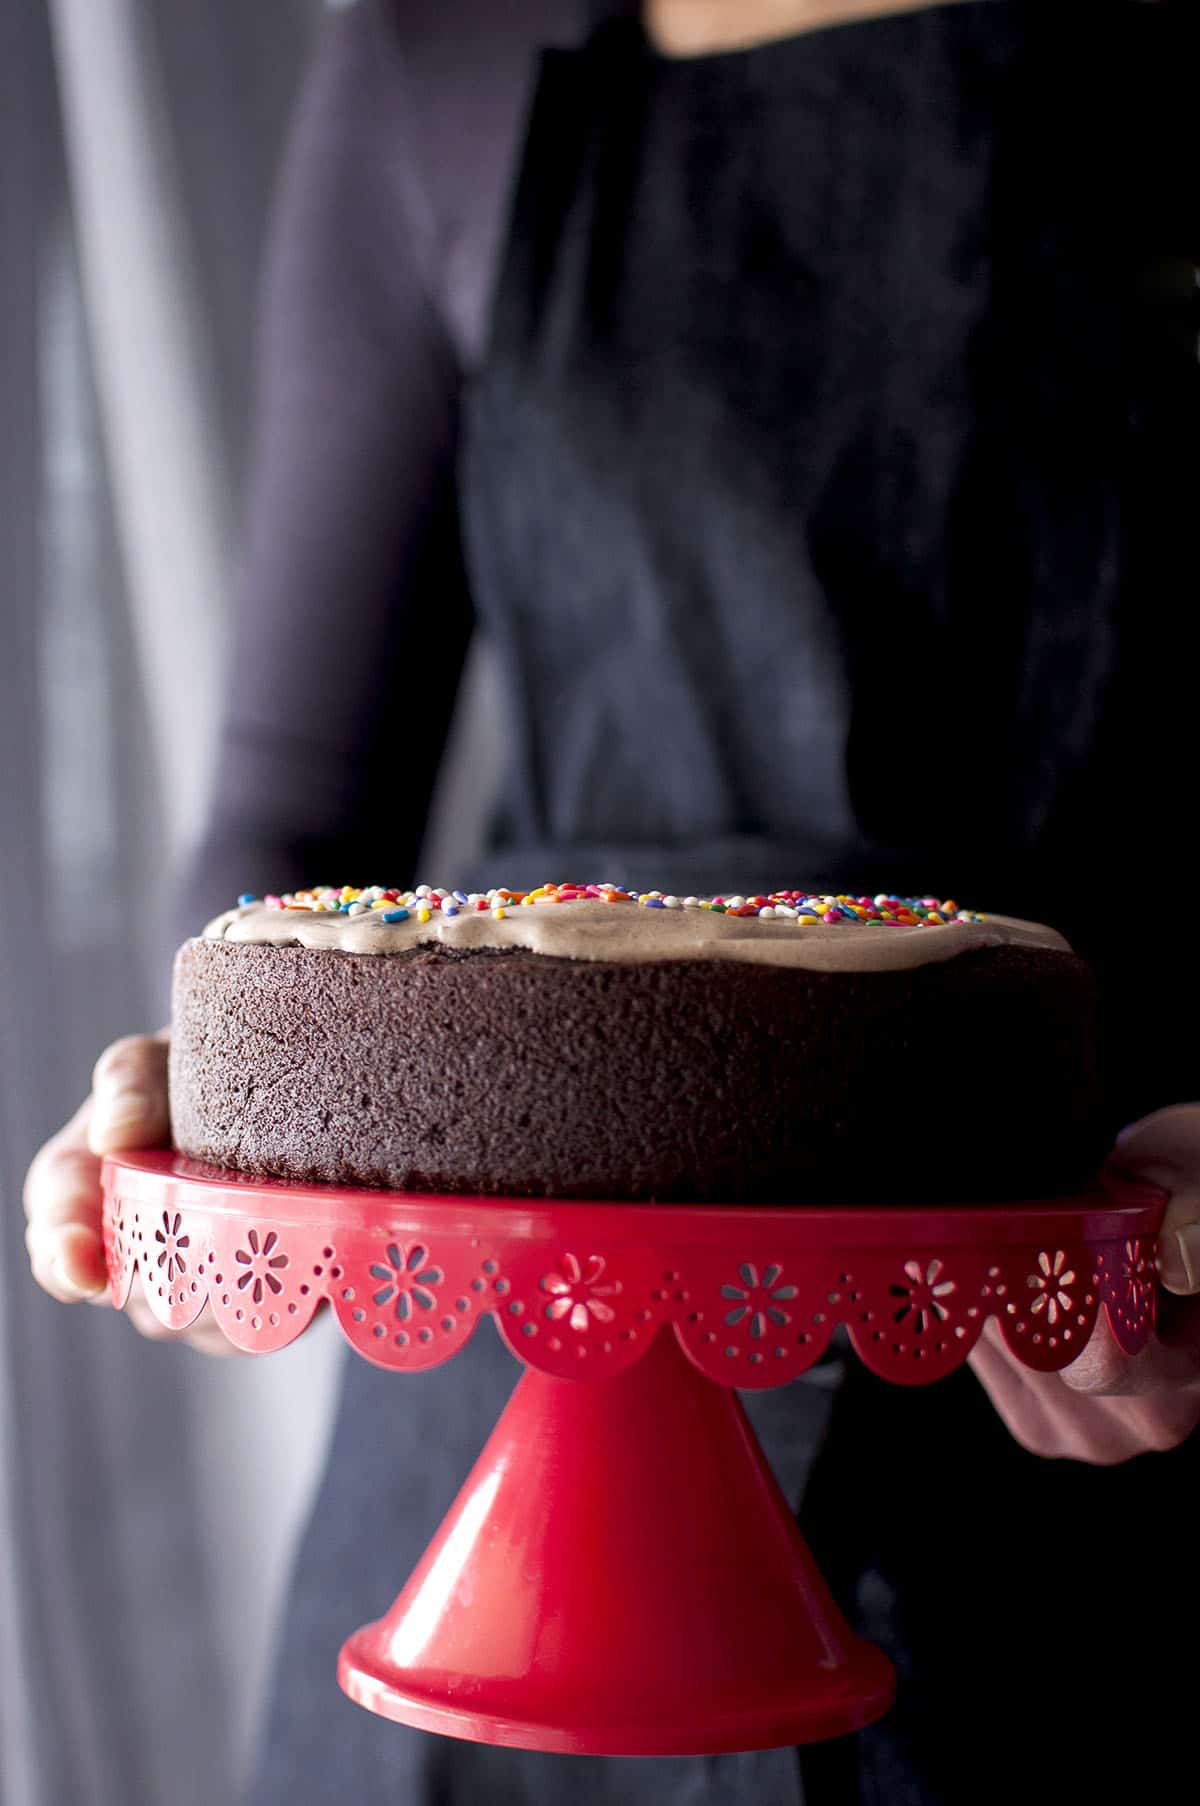 Baker holding a red cake stand with vegan chocolate beet cake